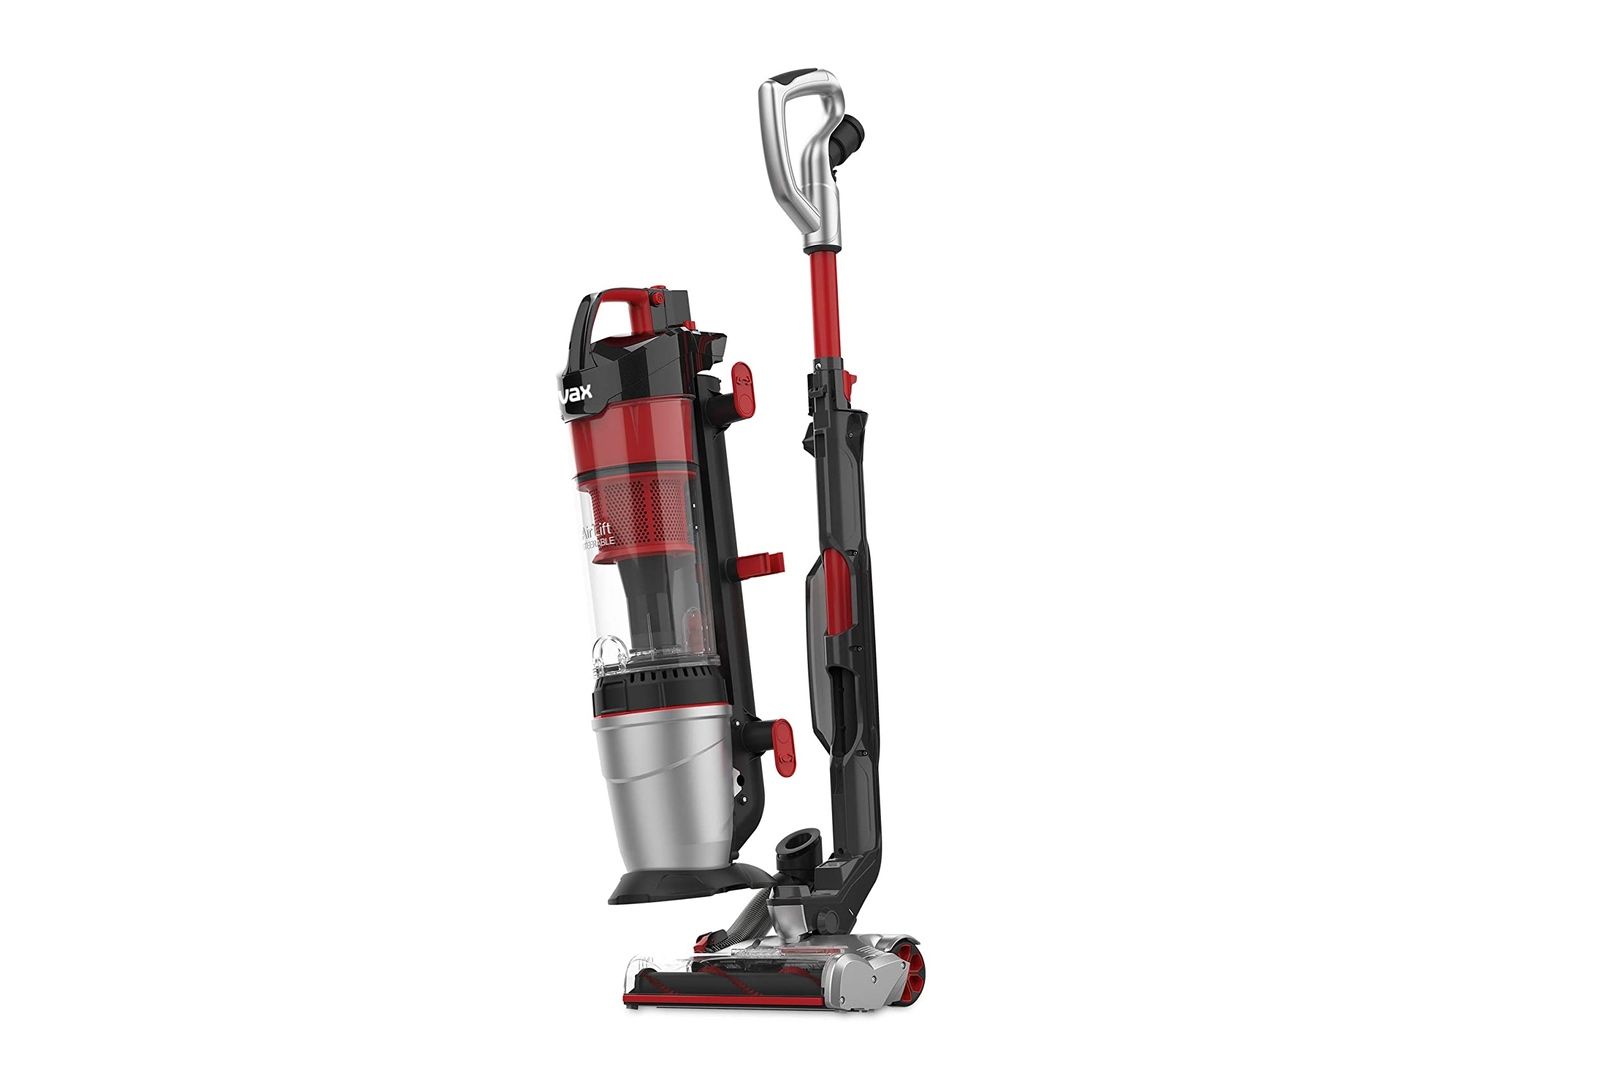 Best upright vacuum cleaner for 2020 image 4